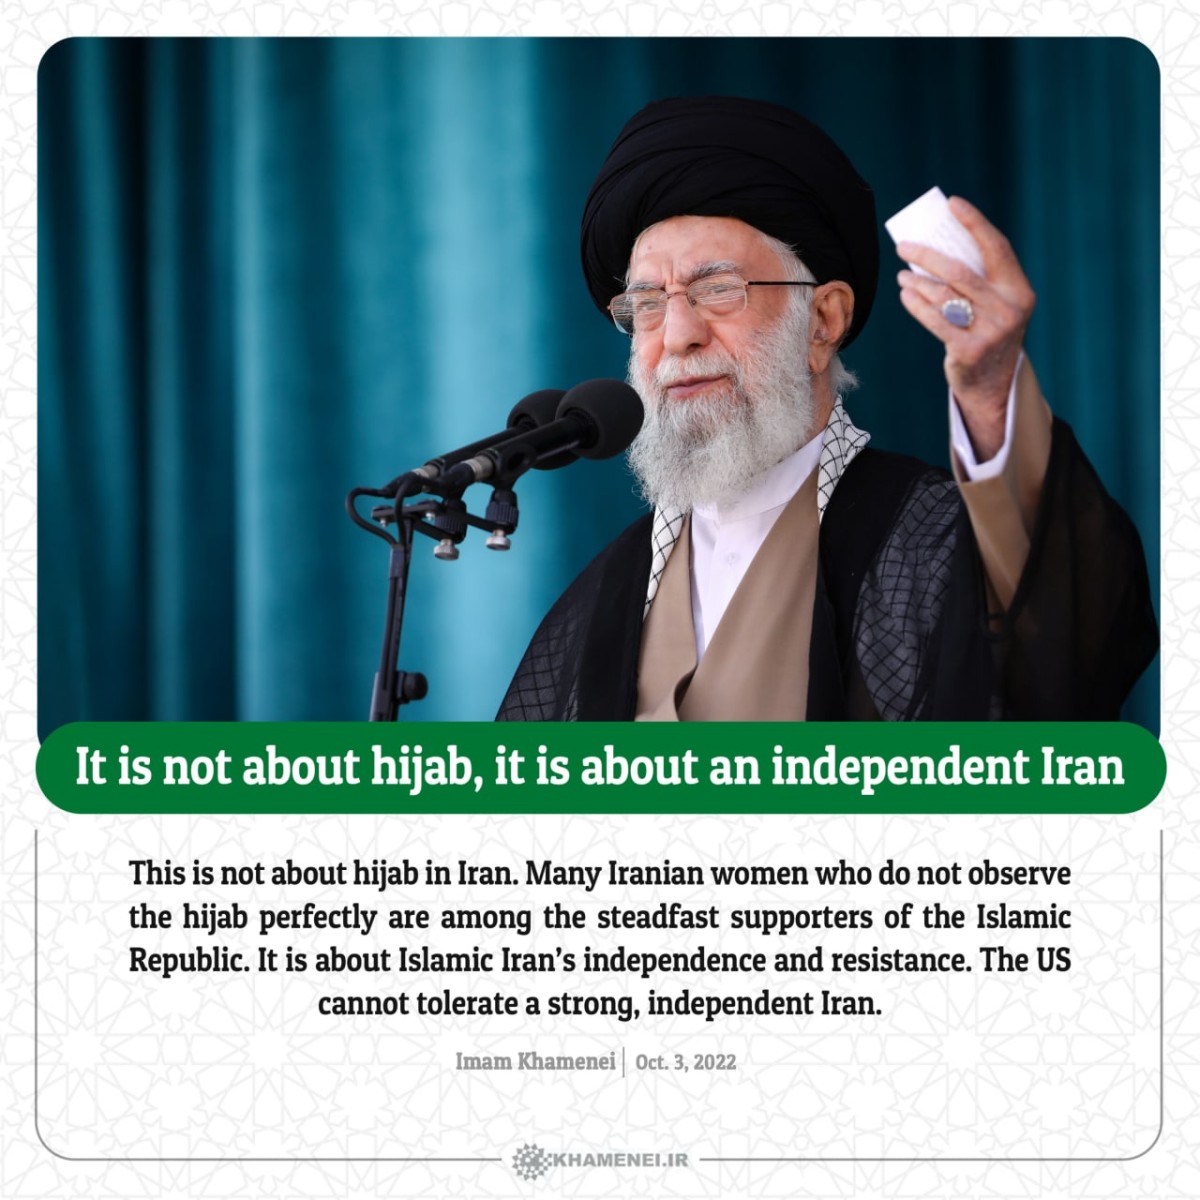 It is not about hijab, it is about an independent Iran